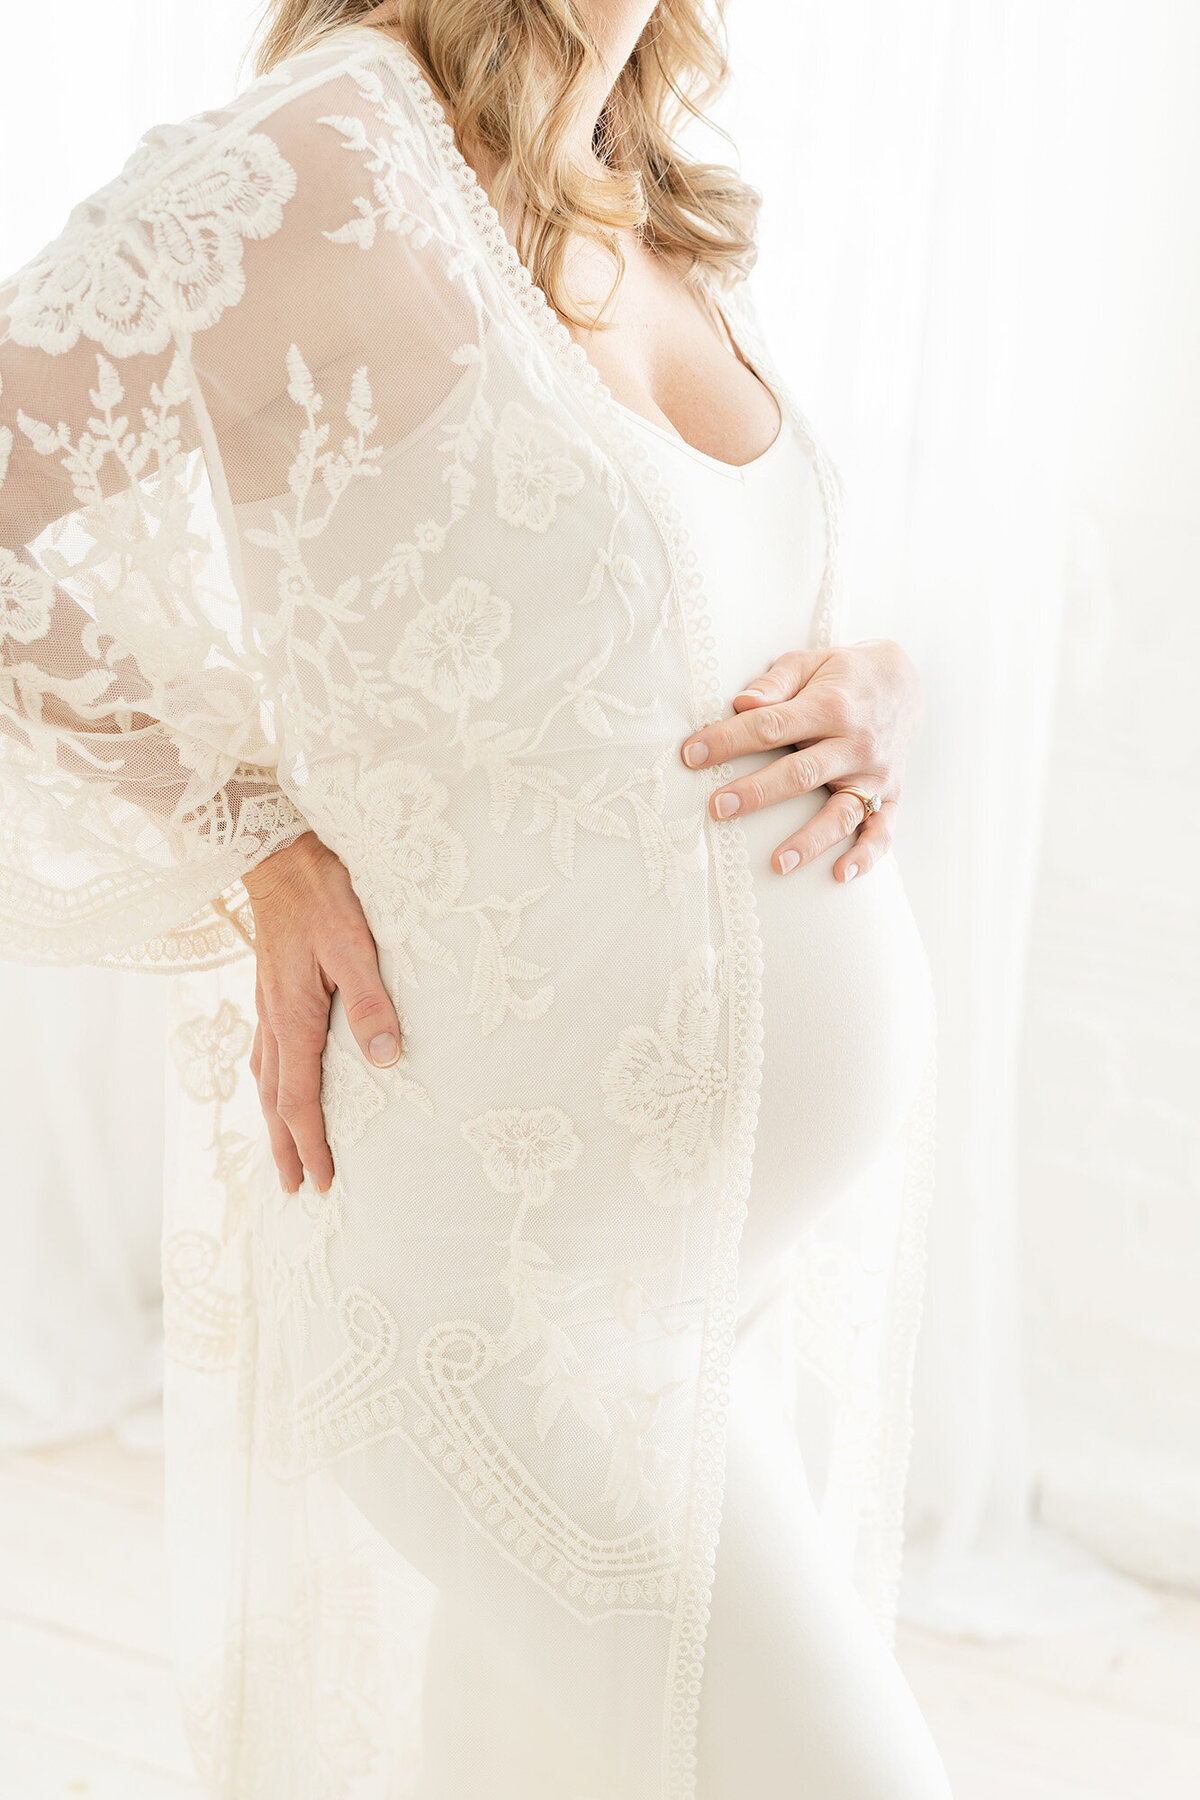 perfect fitted dress for maternity photos at Louisville Ky Julie Brock Photography